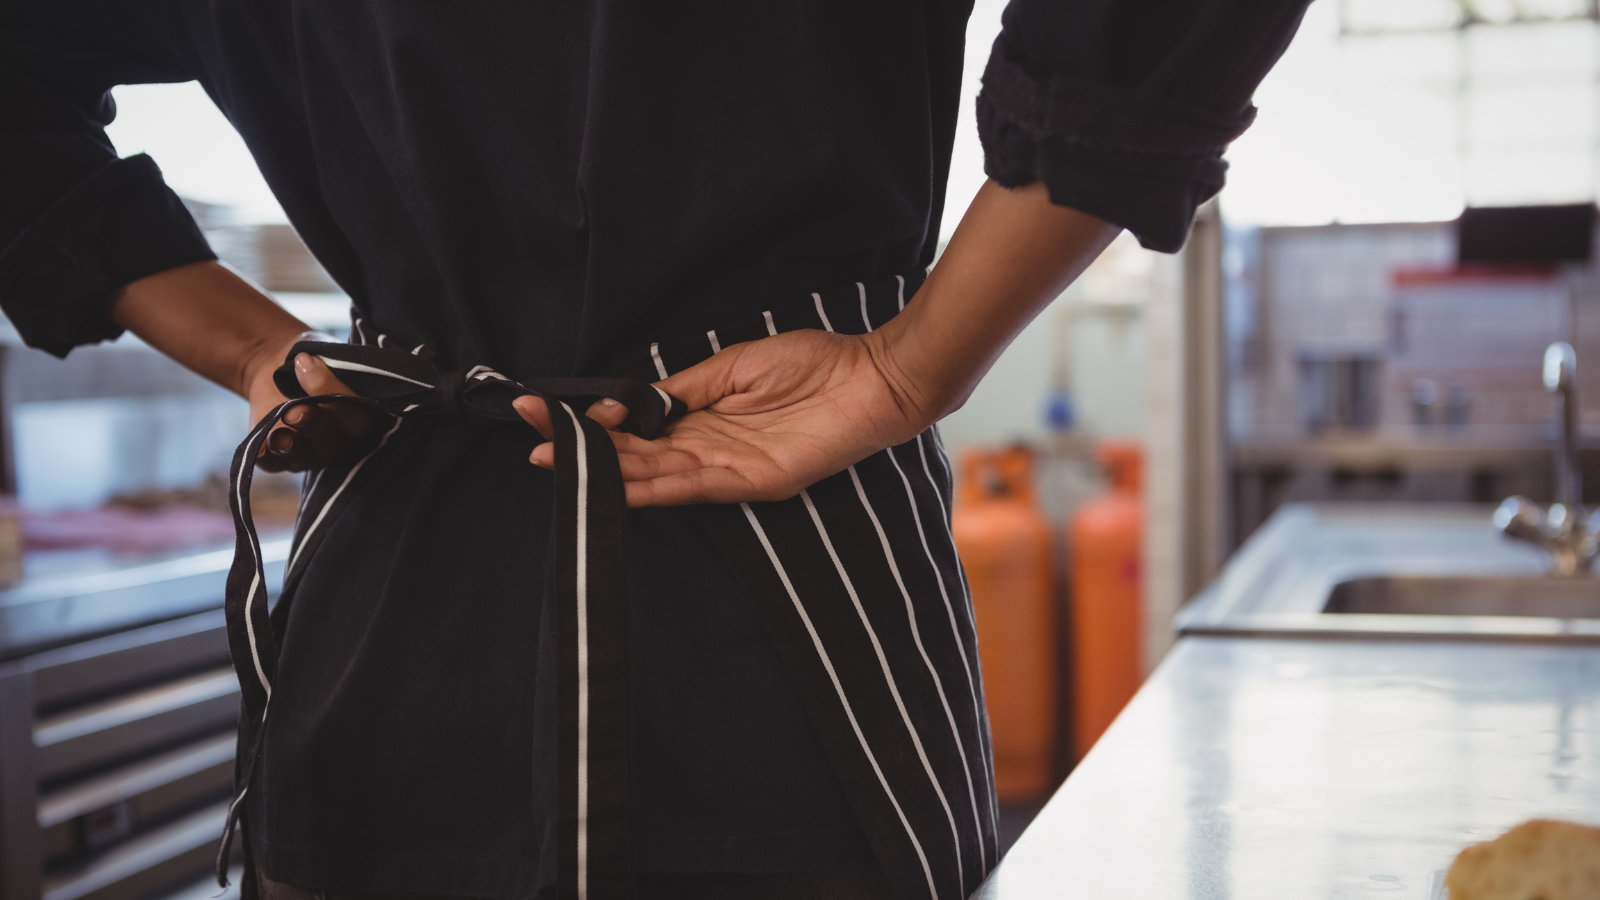 Black woman photographed from behind tying the ties on her striped apron, standing in an industral kitchen.